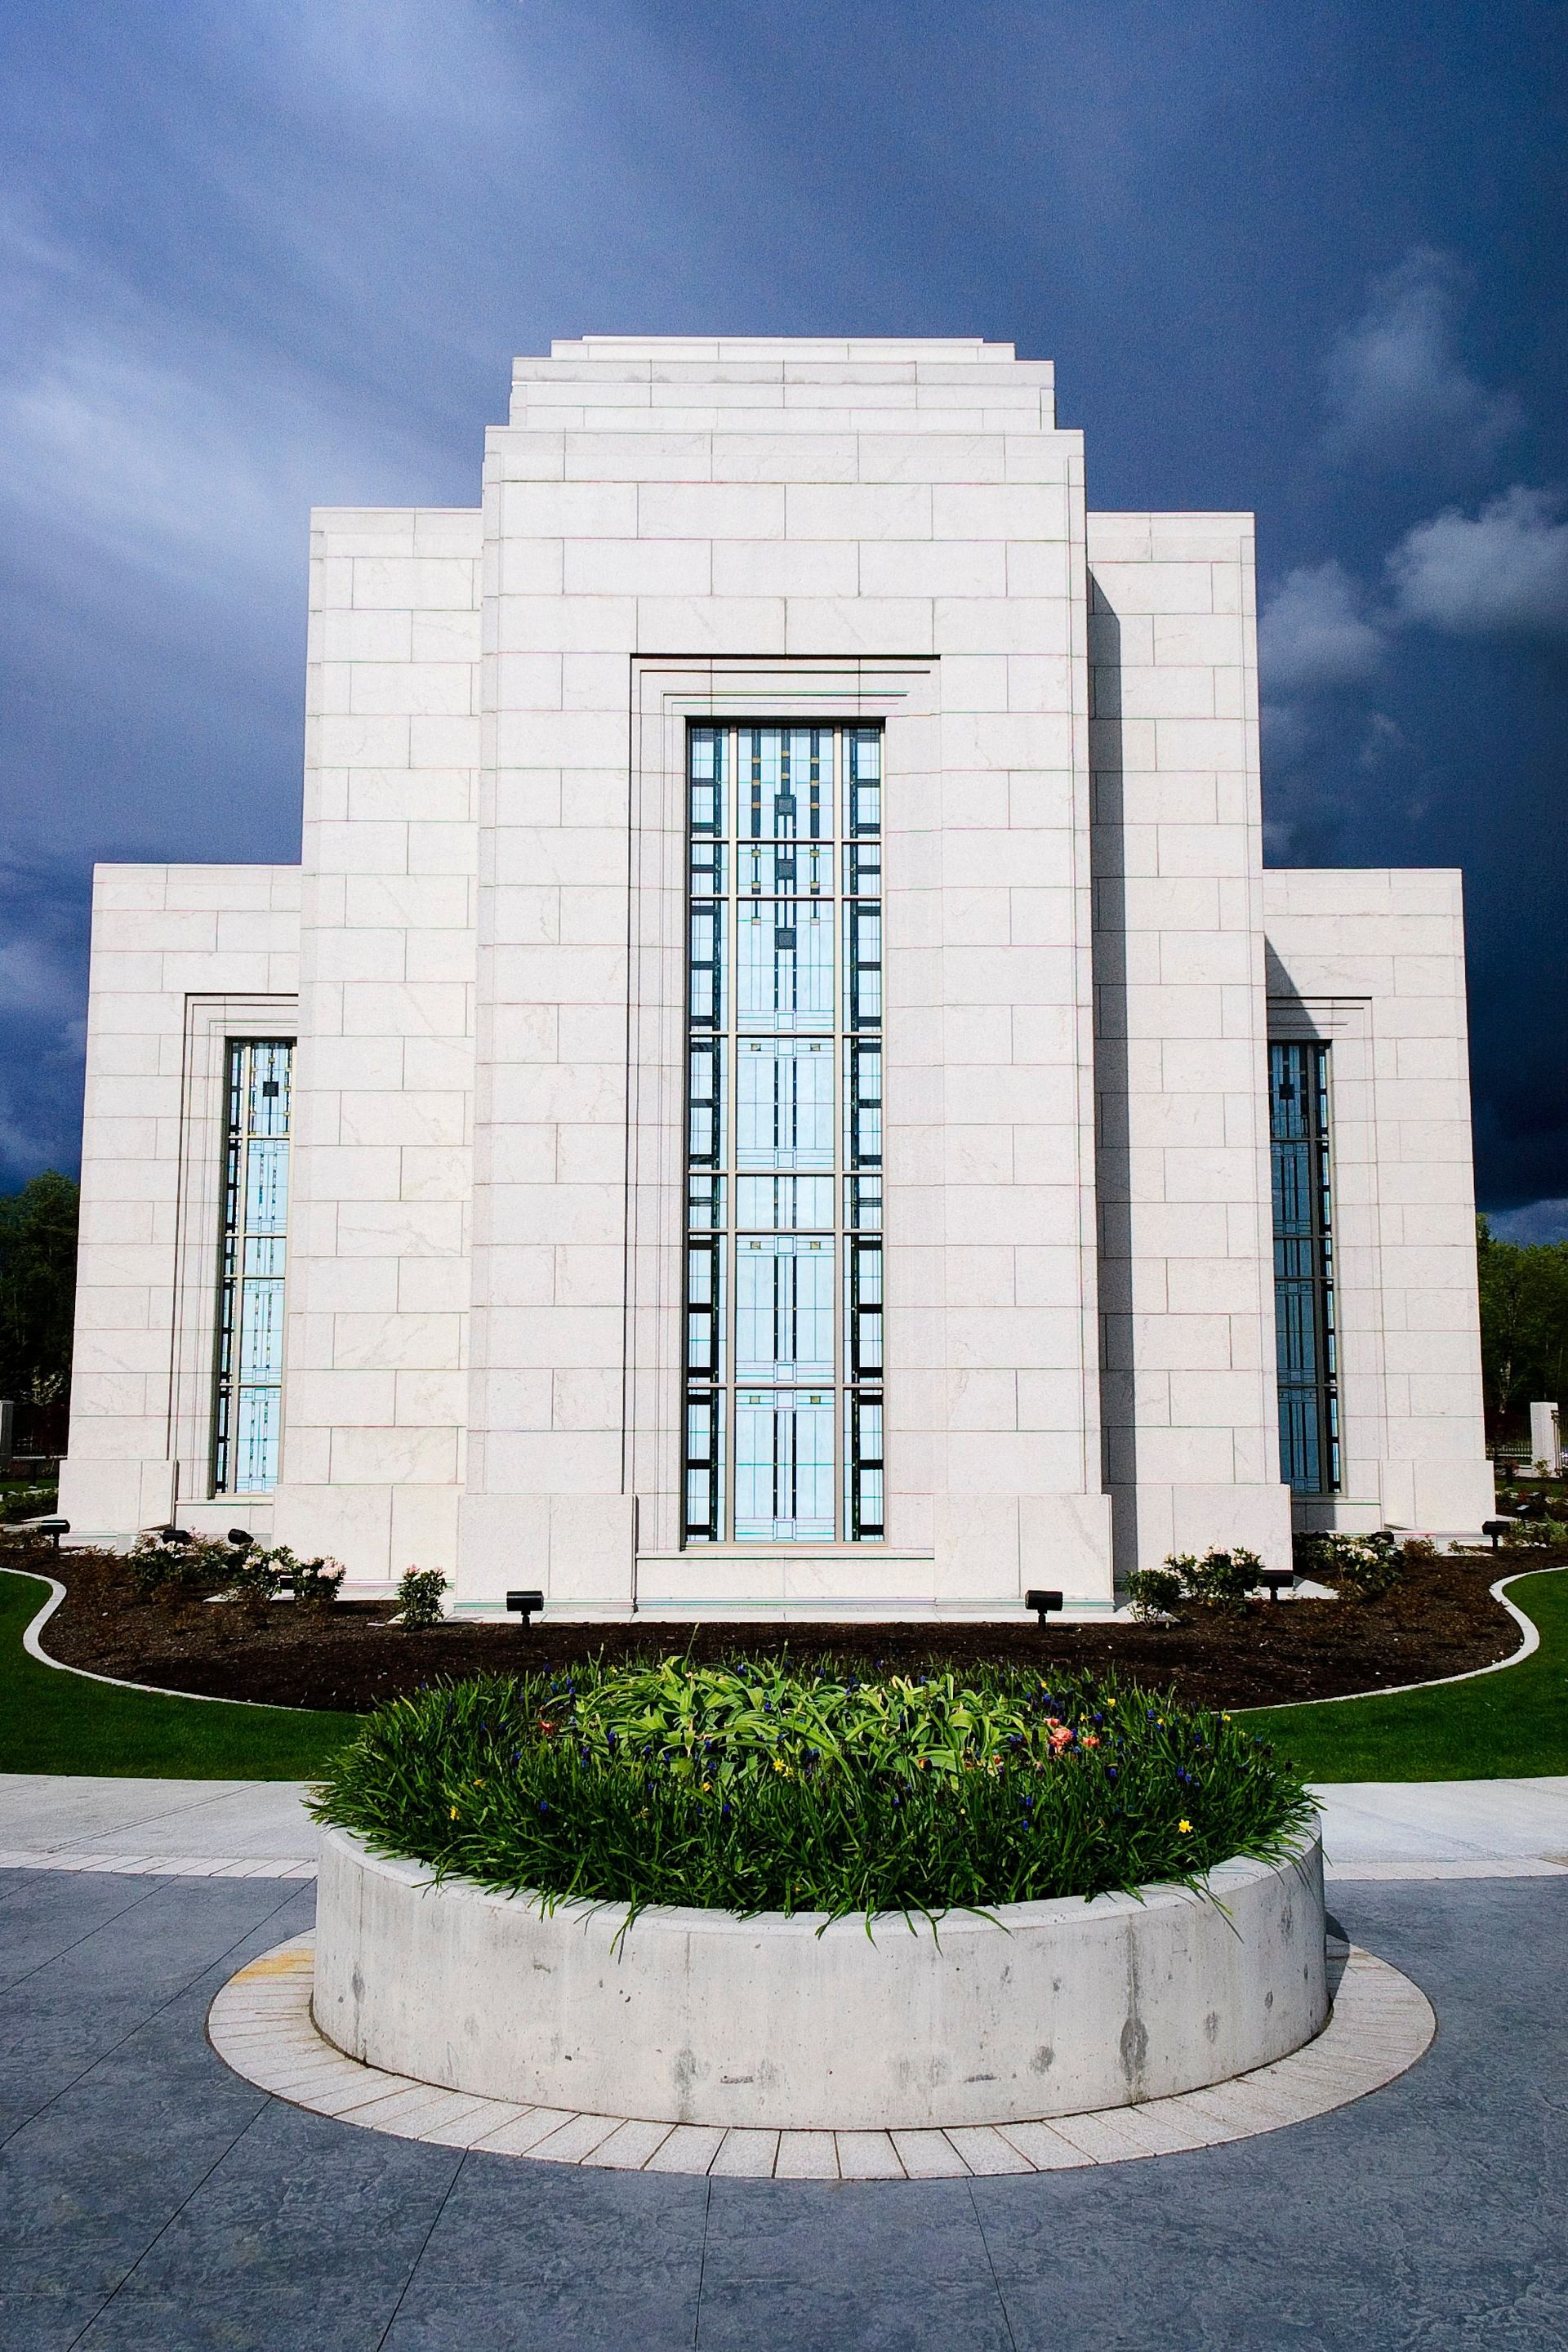 The Vancouver British Columbia Temple west side, with the windows and scenery.